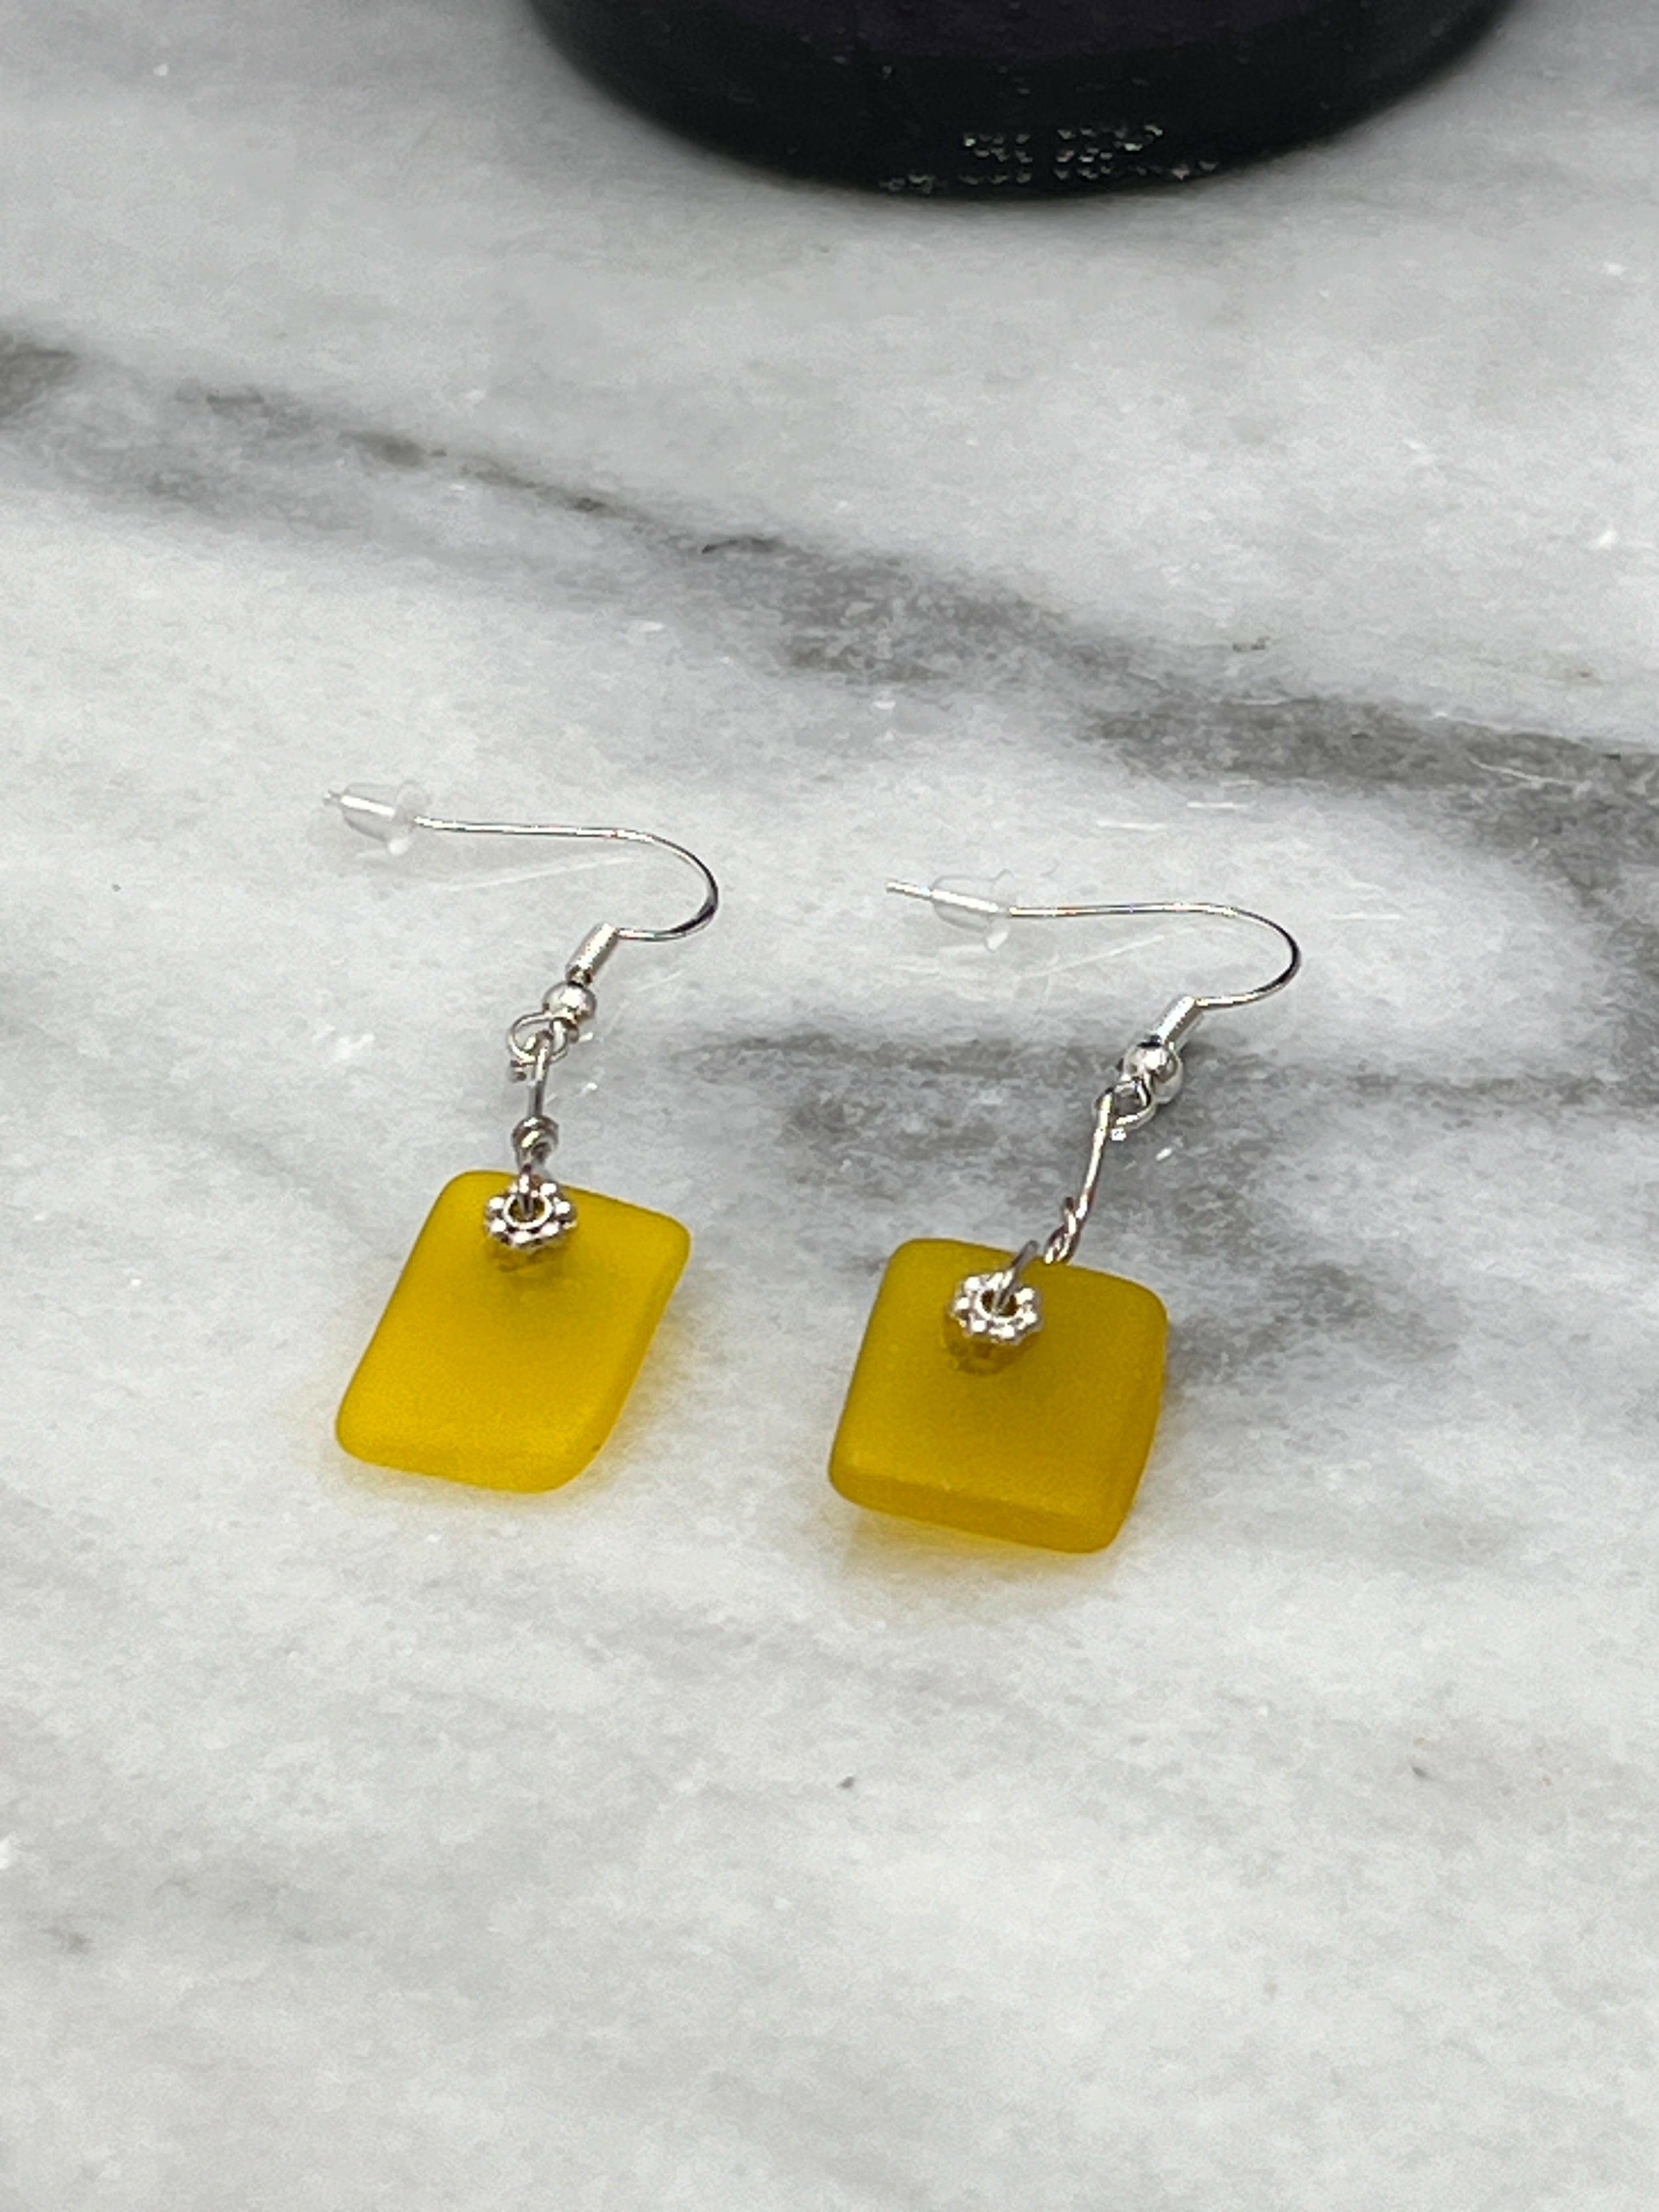 Bec Sue Jewelry Shop earrings 1 inch / yellow / yellow glass and sterling silver loops Yellow Dangling Glass Earrings, Yellow Glass Earrings Tags 706